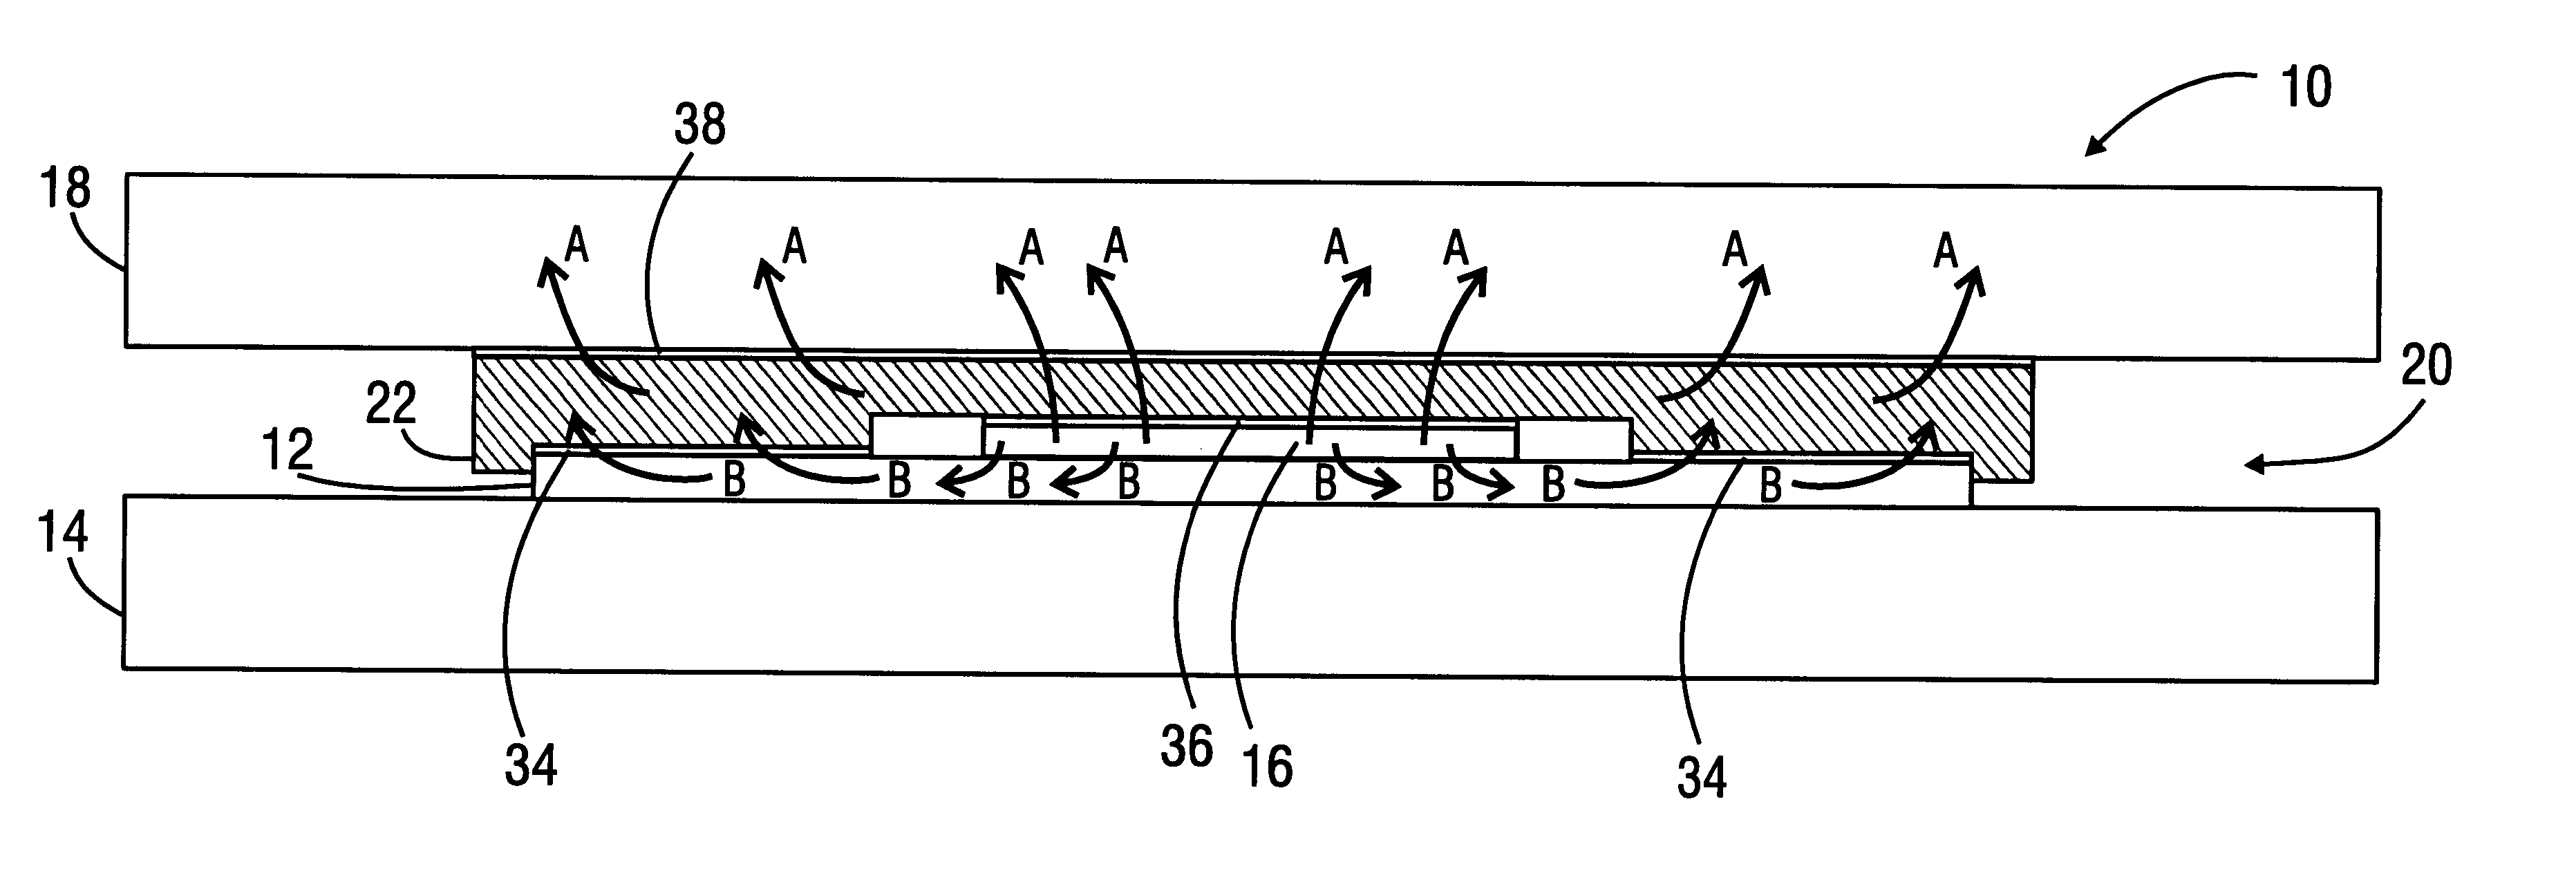 Thermal spreader cap and grease containment structure for semiconductor device